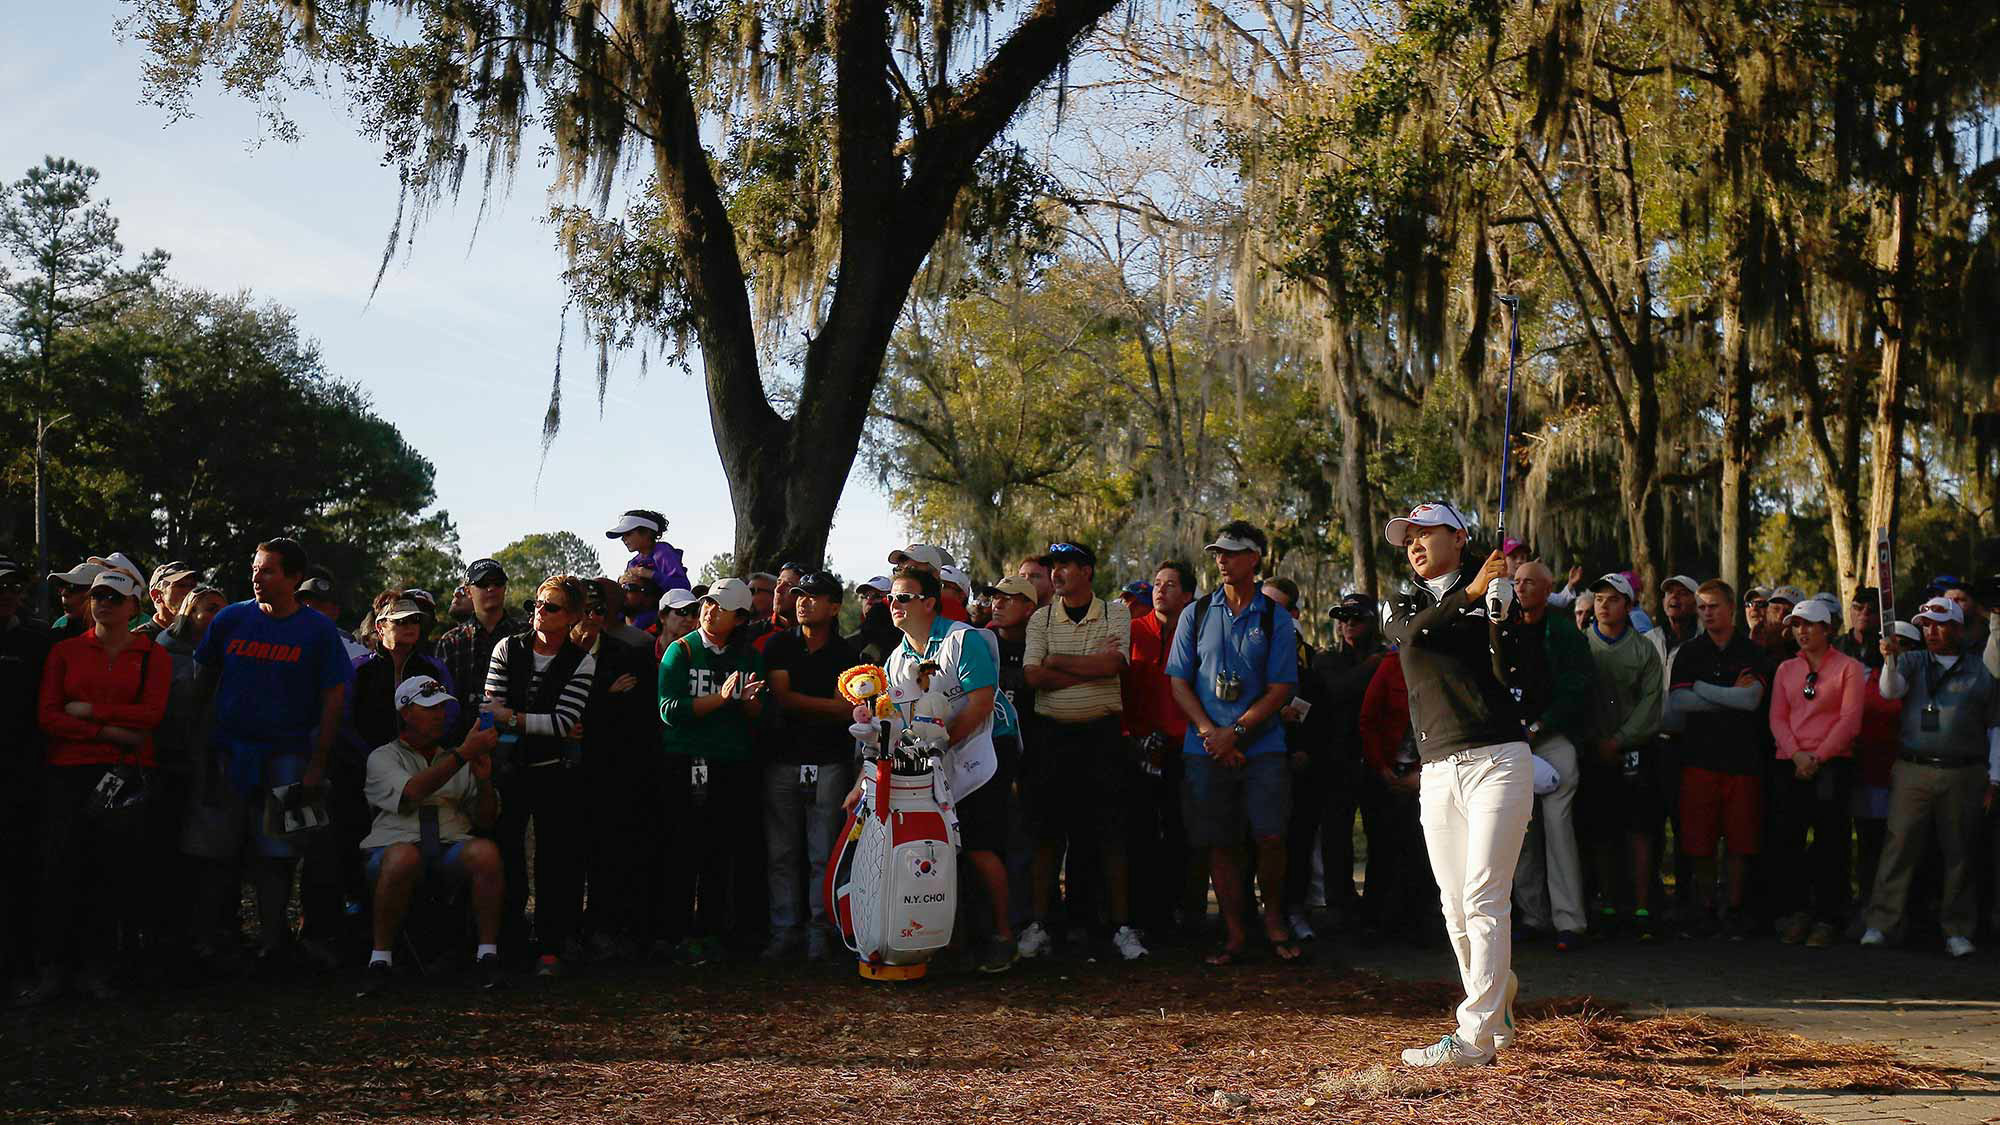 Na Yeon Choi during Final Round at the Golden Ocala Golf & Equestrian Club on January 31, 2015 in Ocala, Florida